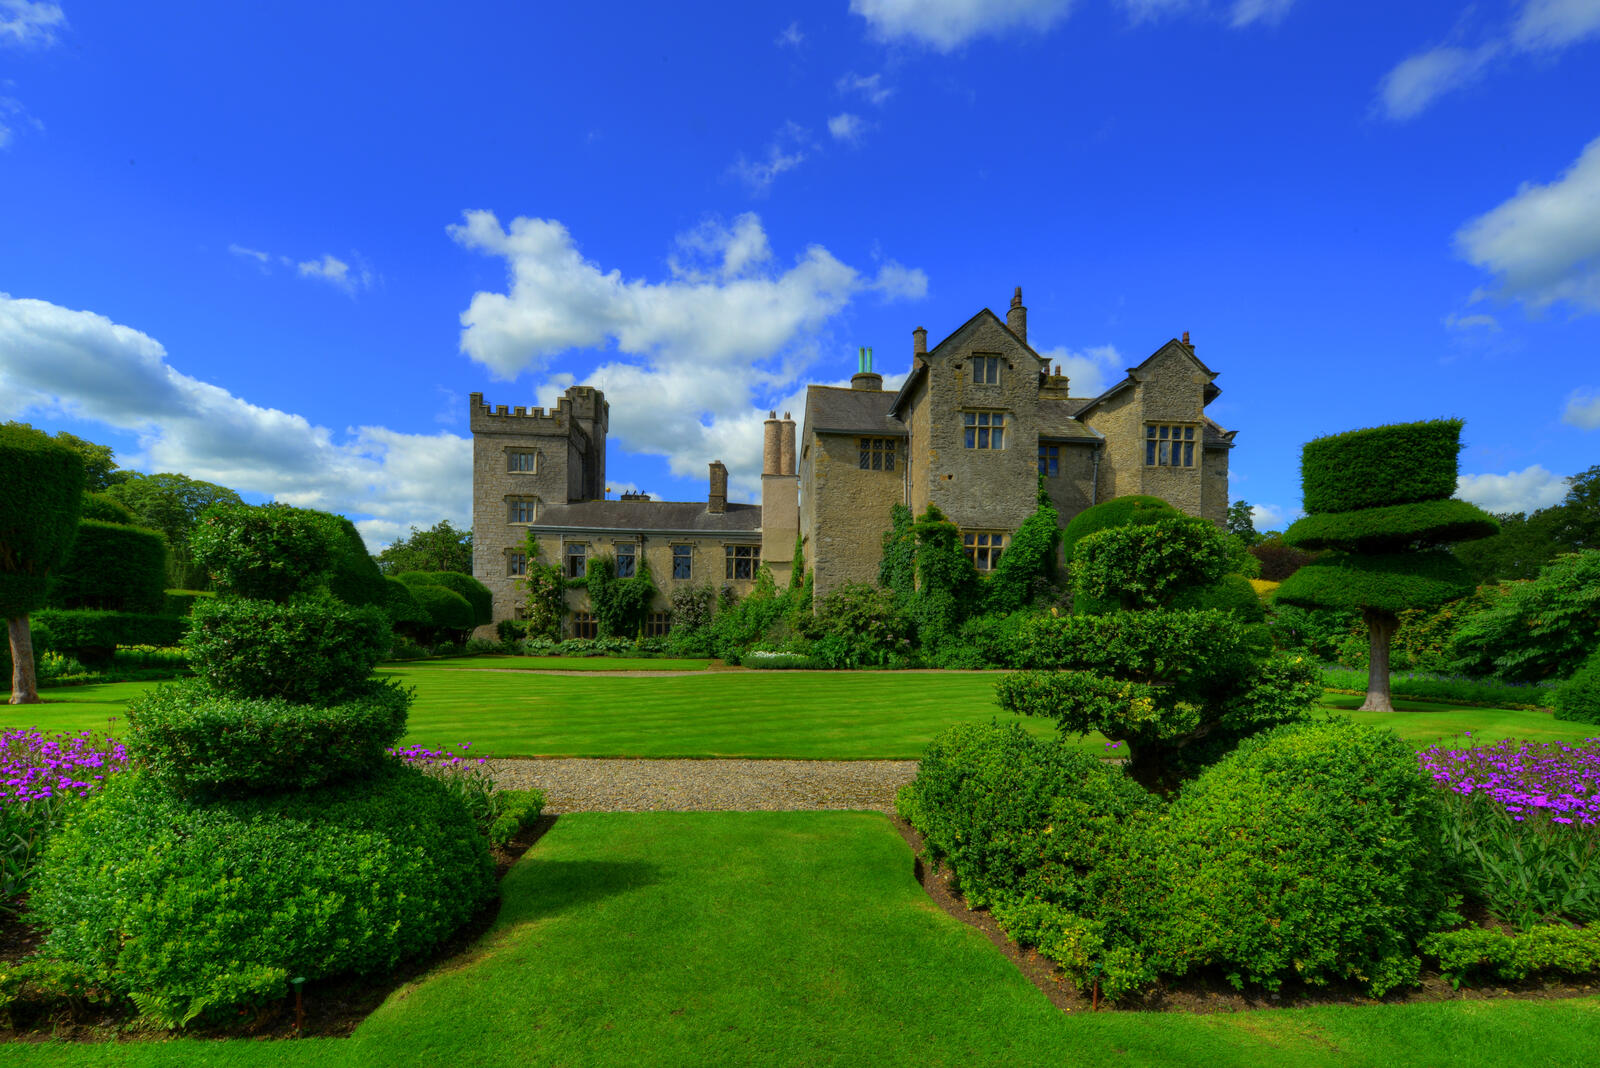 Free photo Download the picture garden of levens hall, cumbria for desktop free